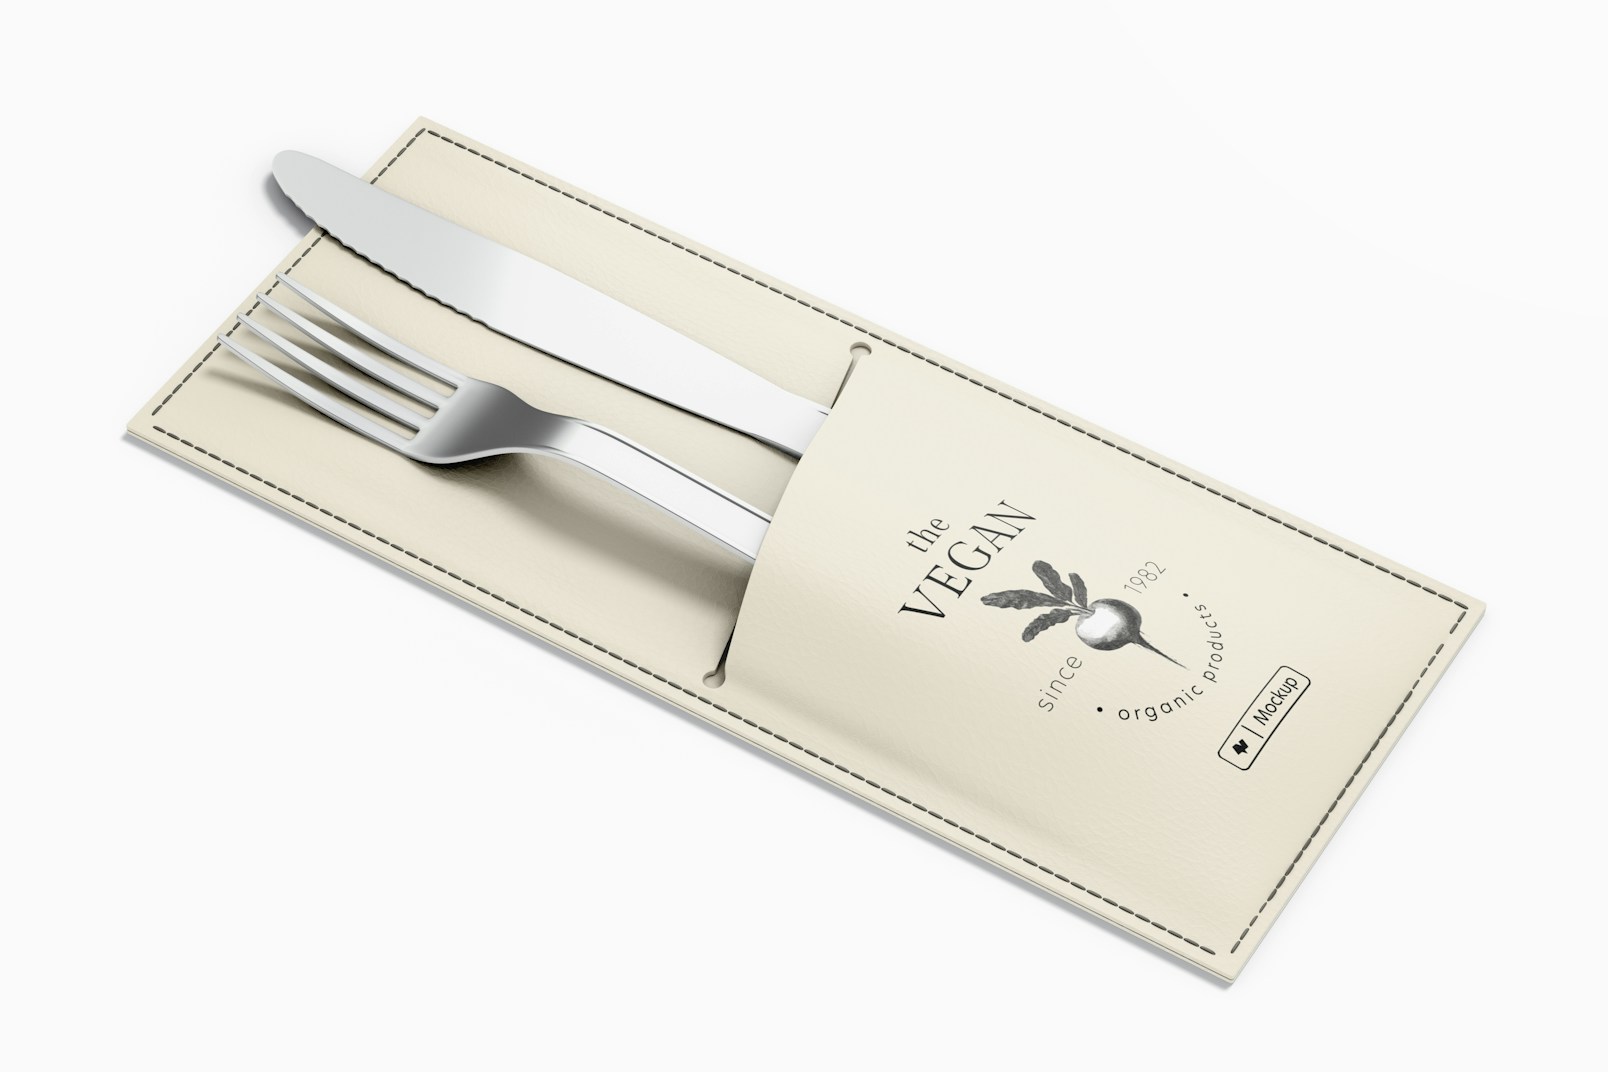 Cutlery Holder Mockup, Perspective